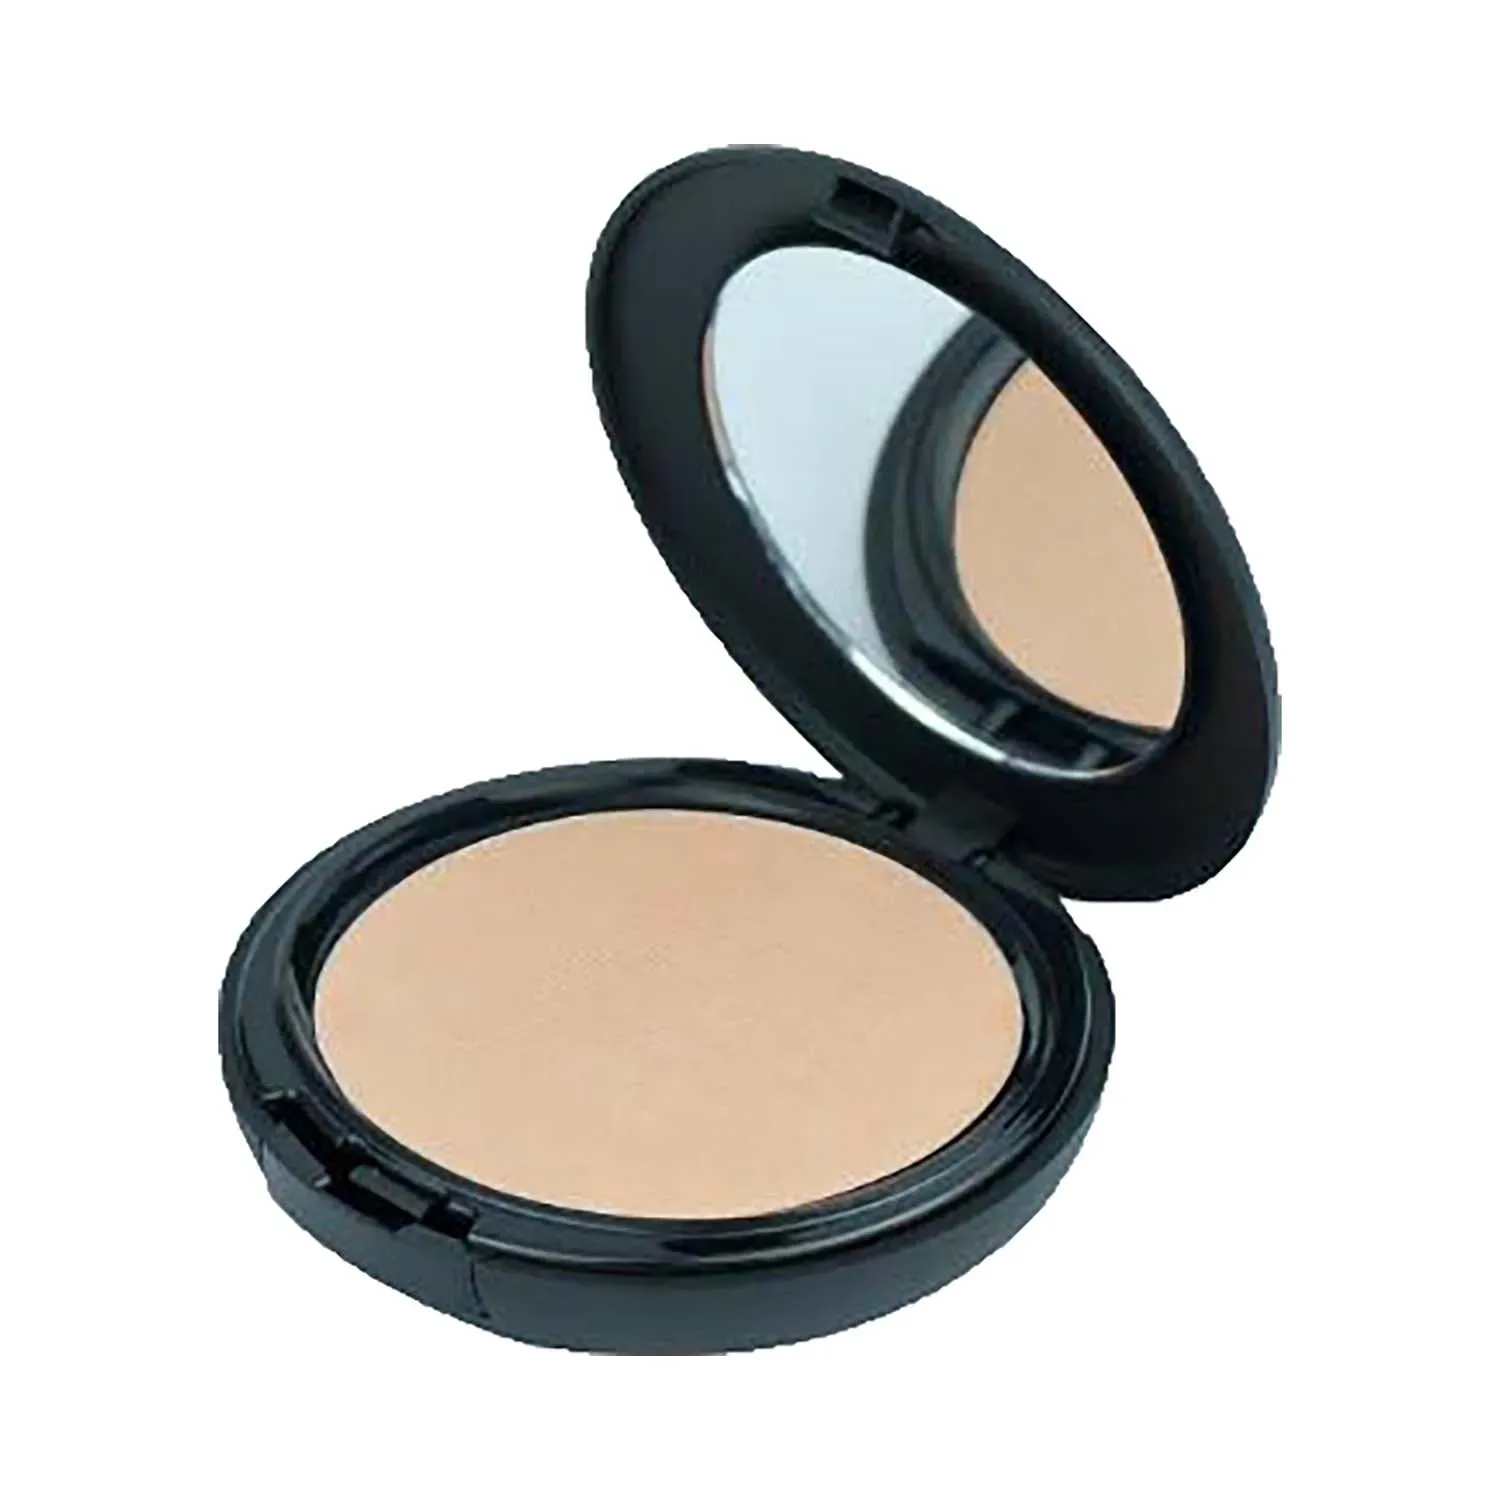 Faces Canada | Faces Canada Ultime Pro Expert Cover Compact - 02 Natural (9g)